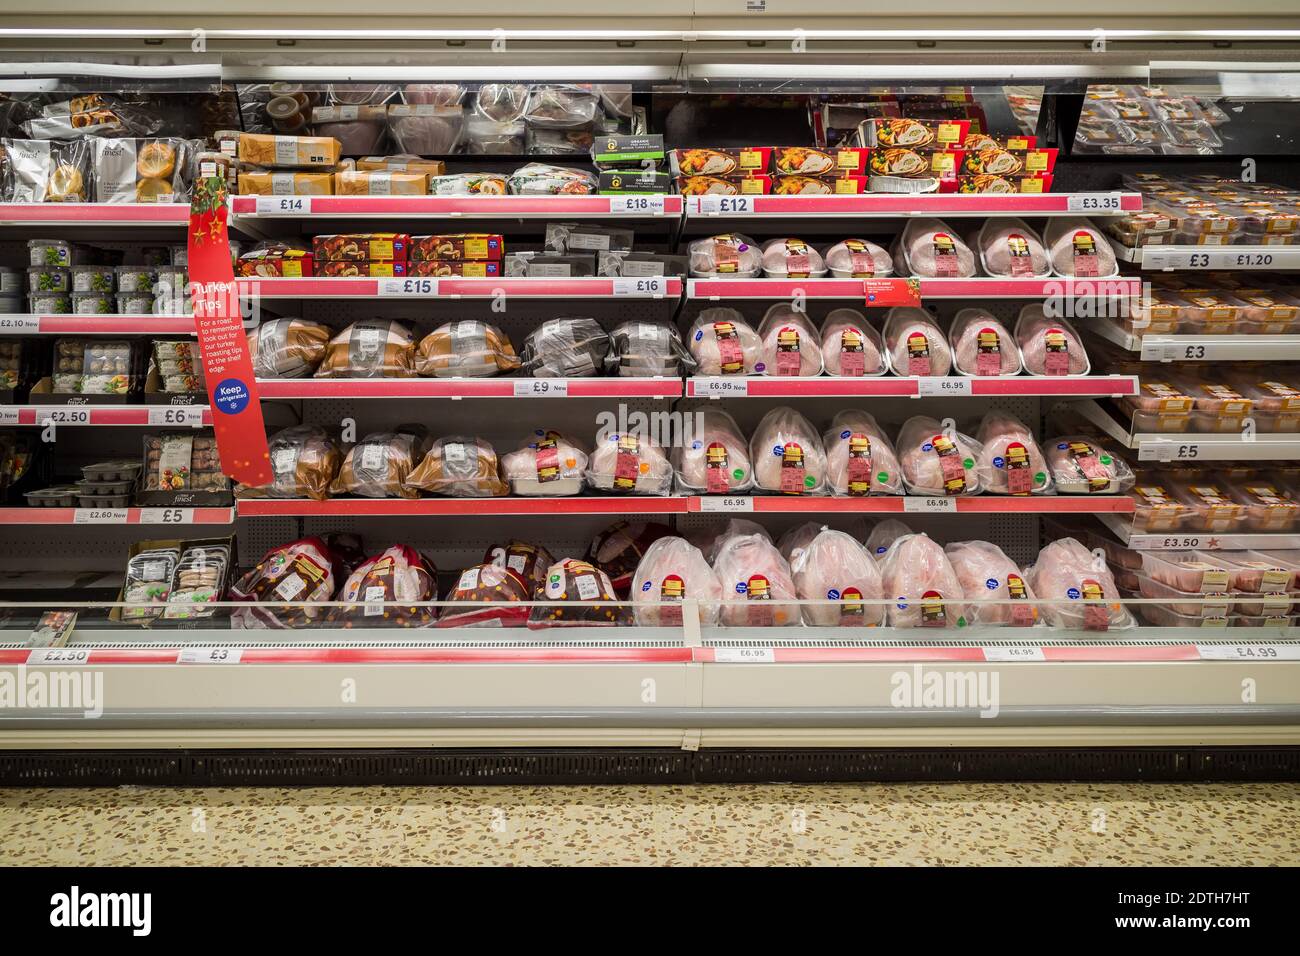 London, UK. 22nd Dec, 2020. Christmas: Fully stocked Turkey aisle in Tesco supermarket just prior to morning opening time. Dozens of Tesco, Asda and Waitrose customers have had their online turkey orders cancelled due to a “technical glitch” just days before Christmas. Credit: Guy Corbishley/Alamy Live News Stock Photo